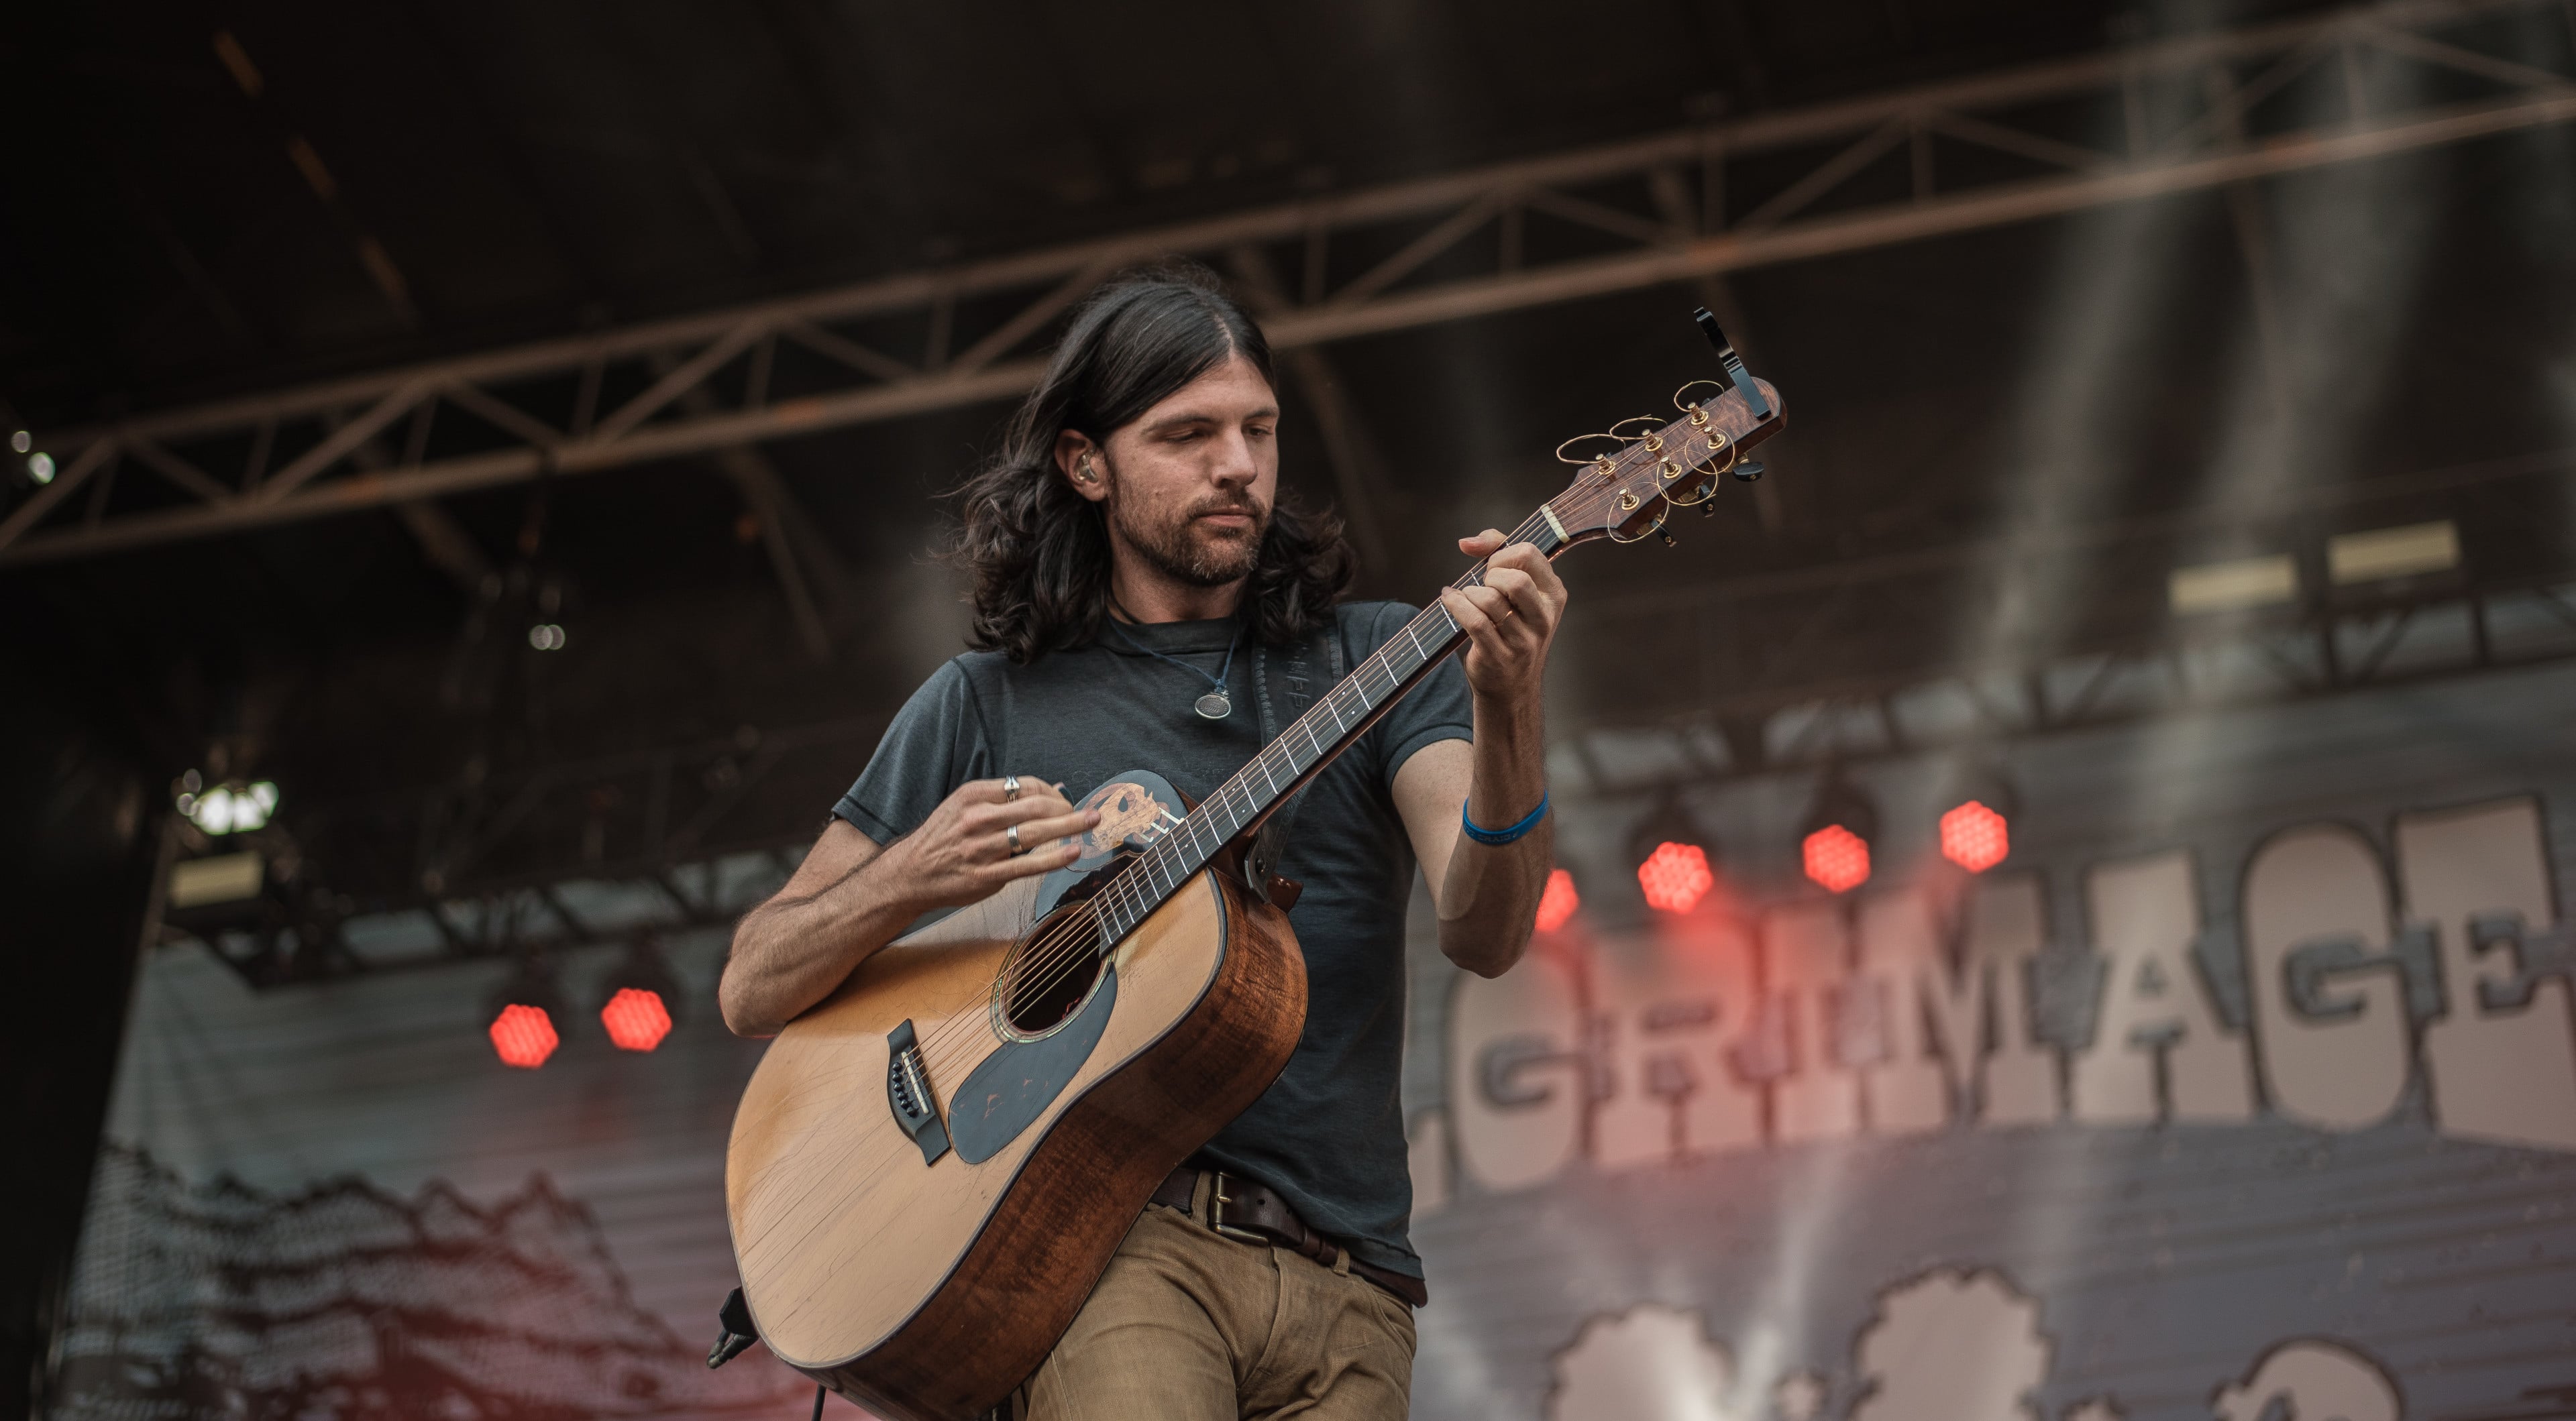 In Photos: Pilgrimage Festival 2017, Day 1 (Featuring The Avett Brothers, Gary Clark Jr. and More)